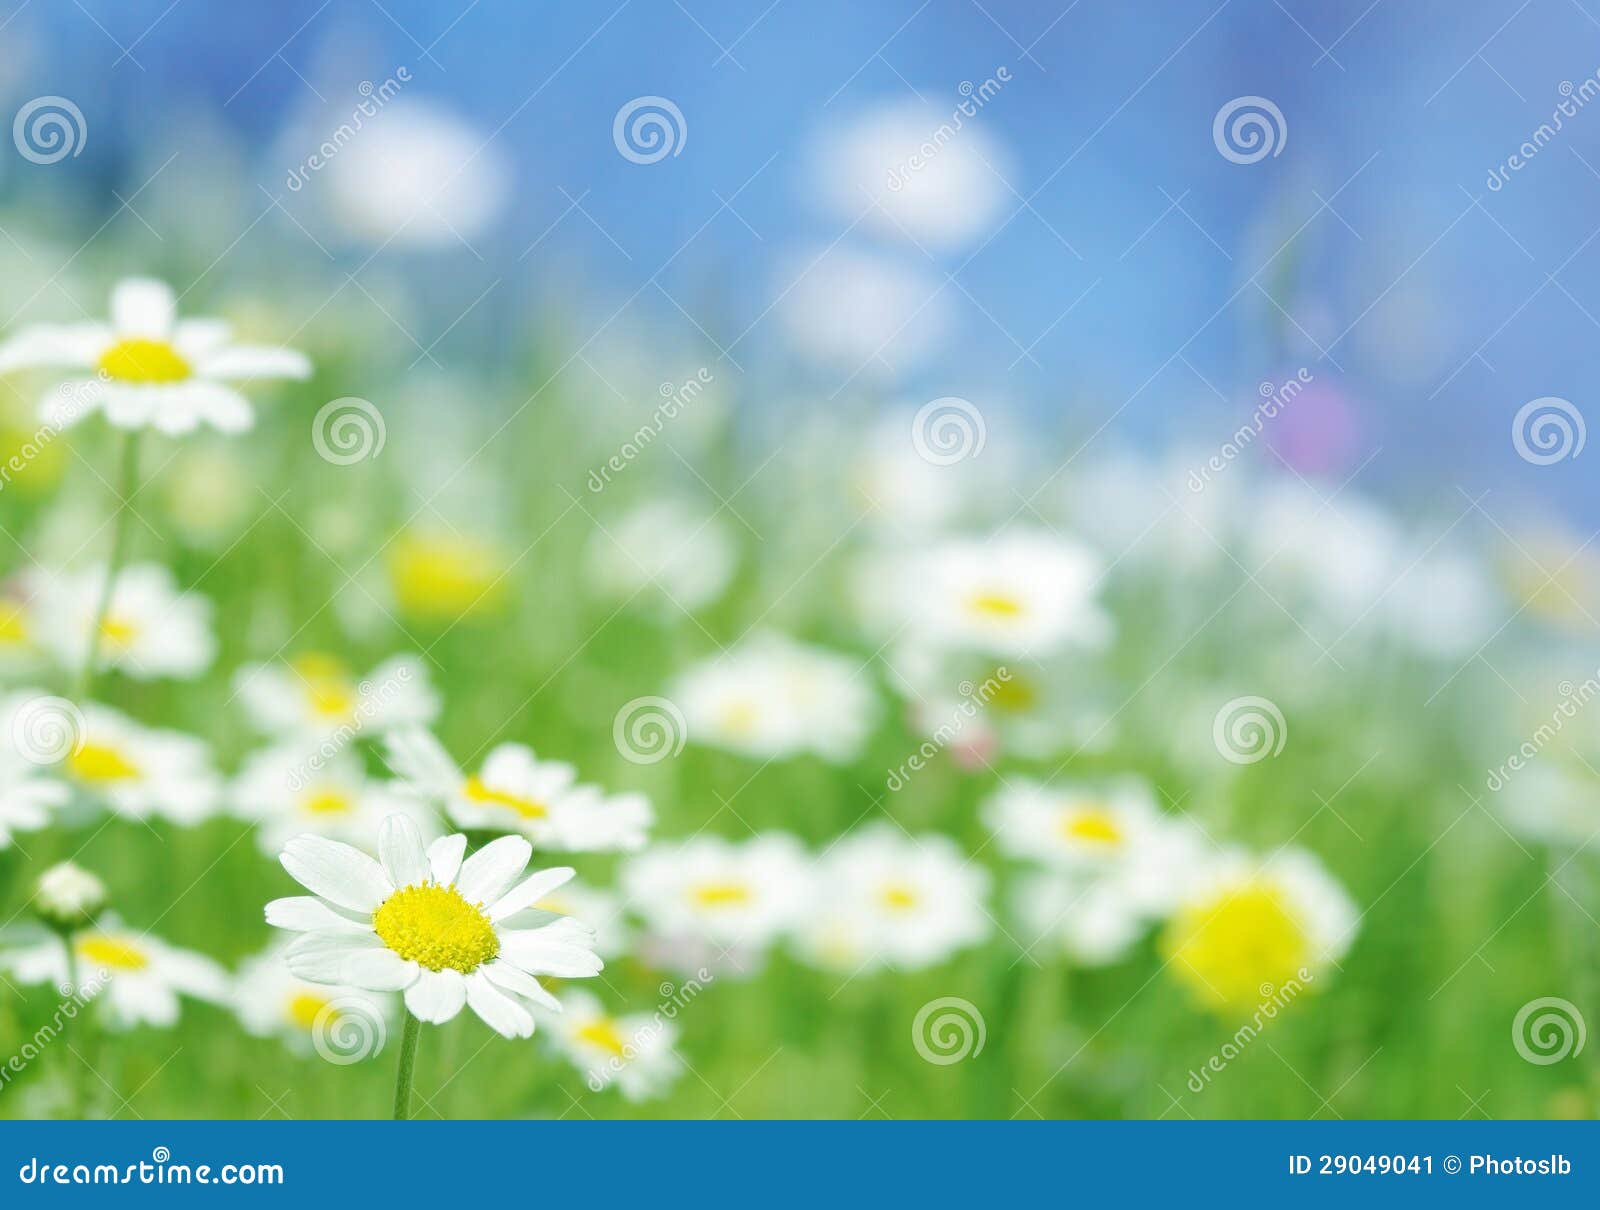 Green Spring Flower Stock Photos and Pictures - 13,187,672 Images